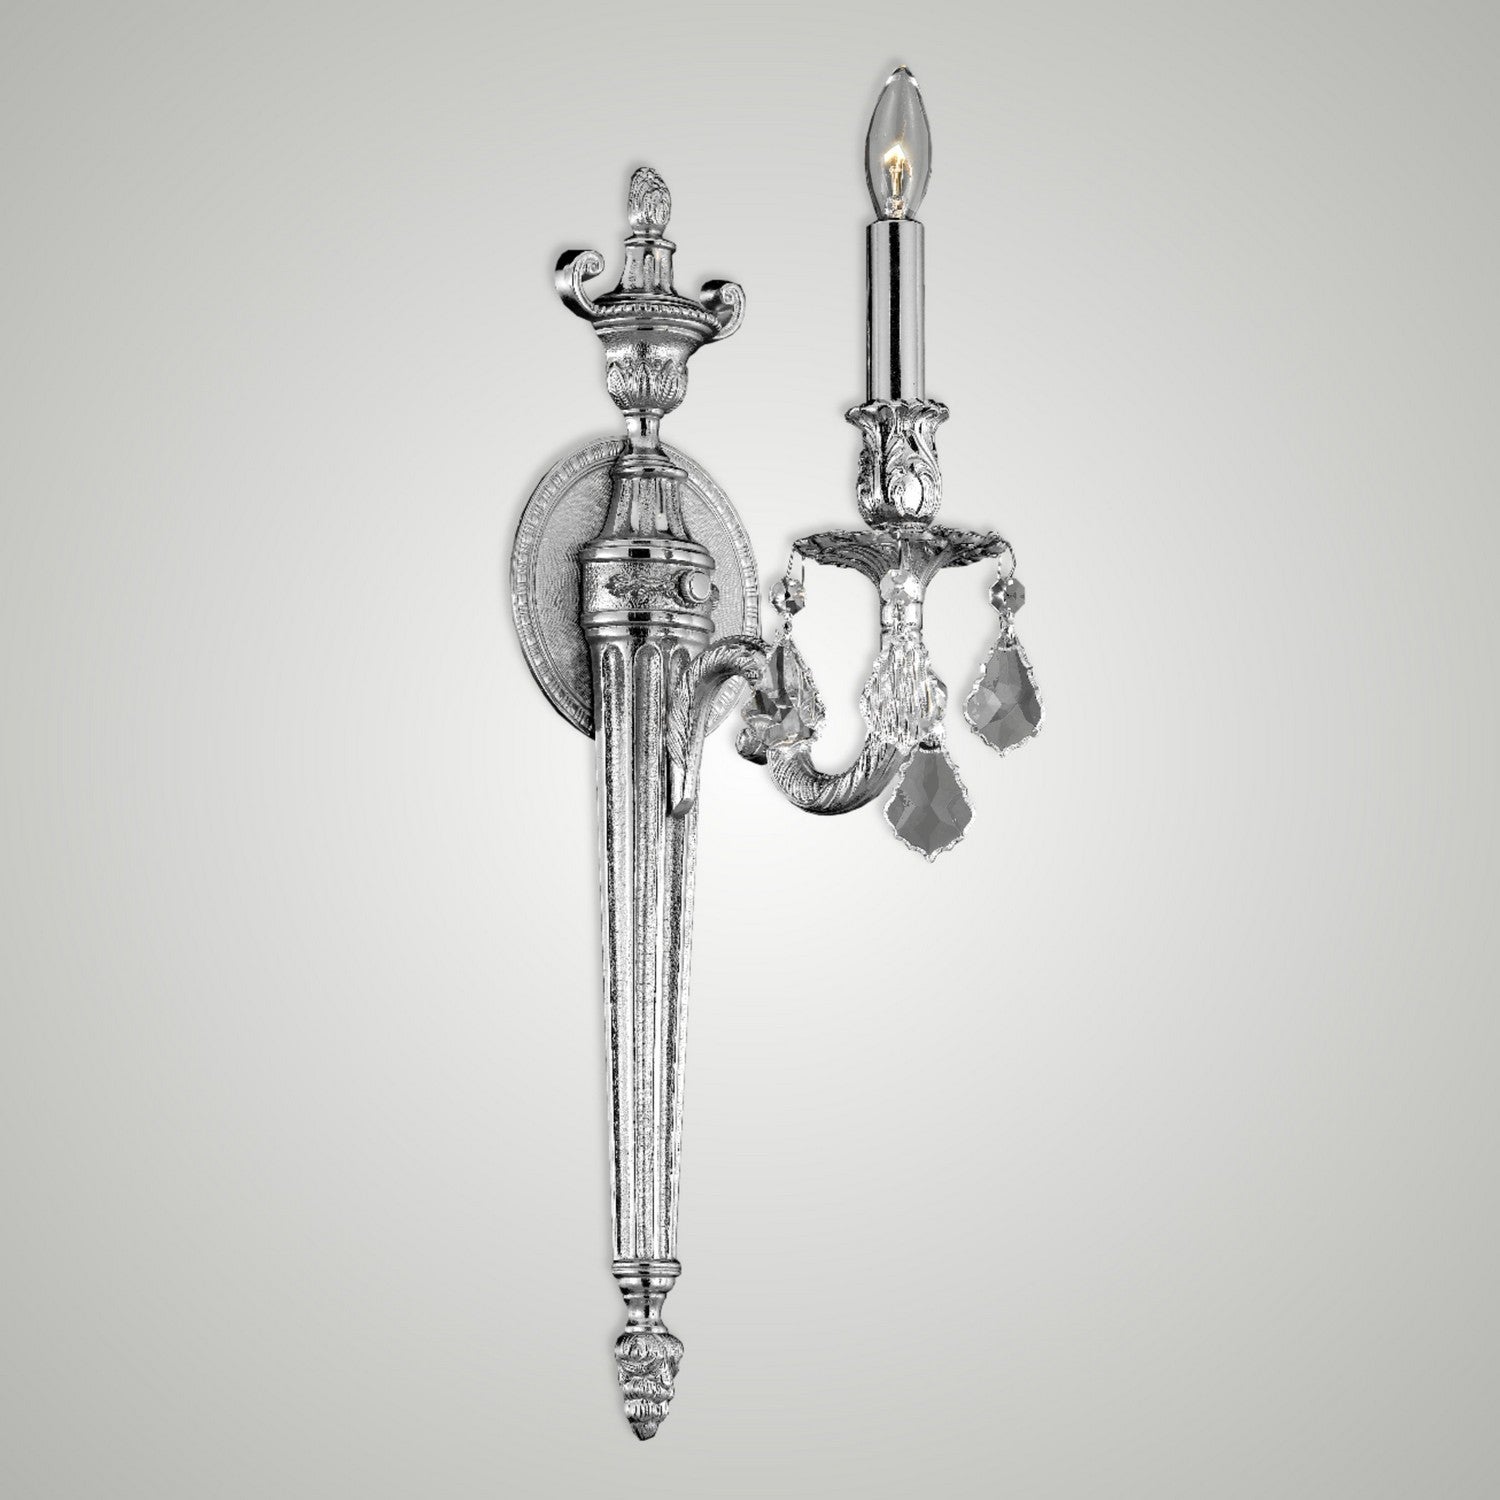 Brass and Crystal Wall Sconce WS2111